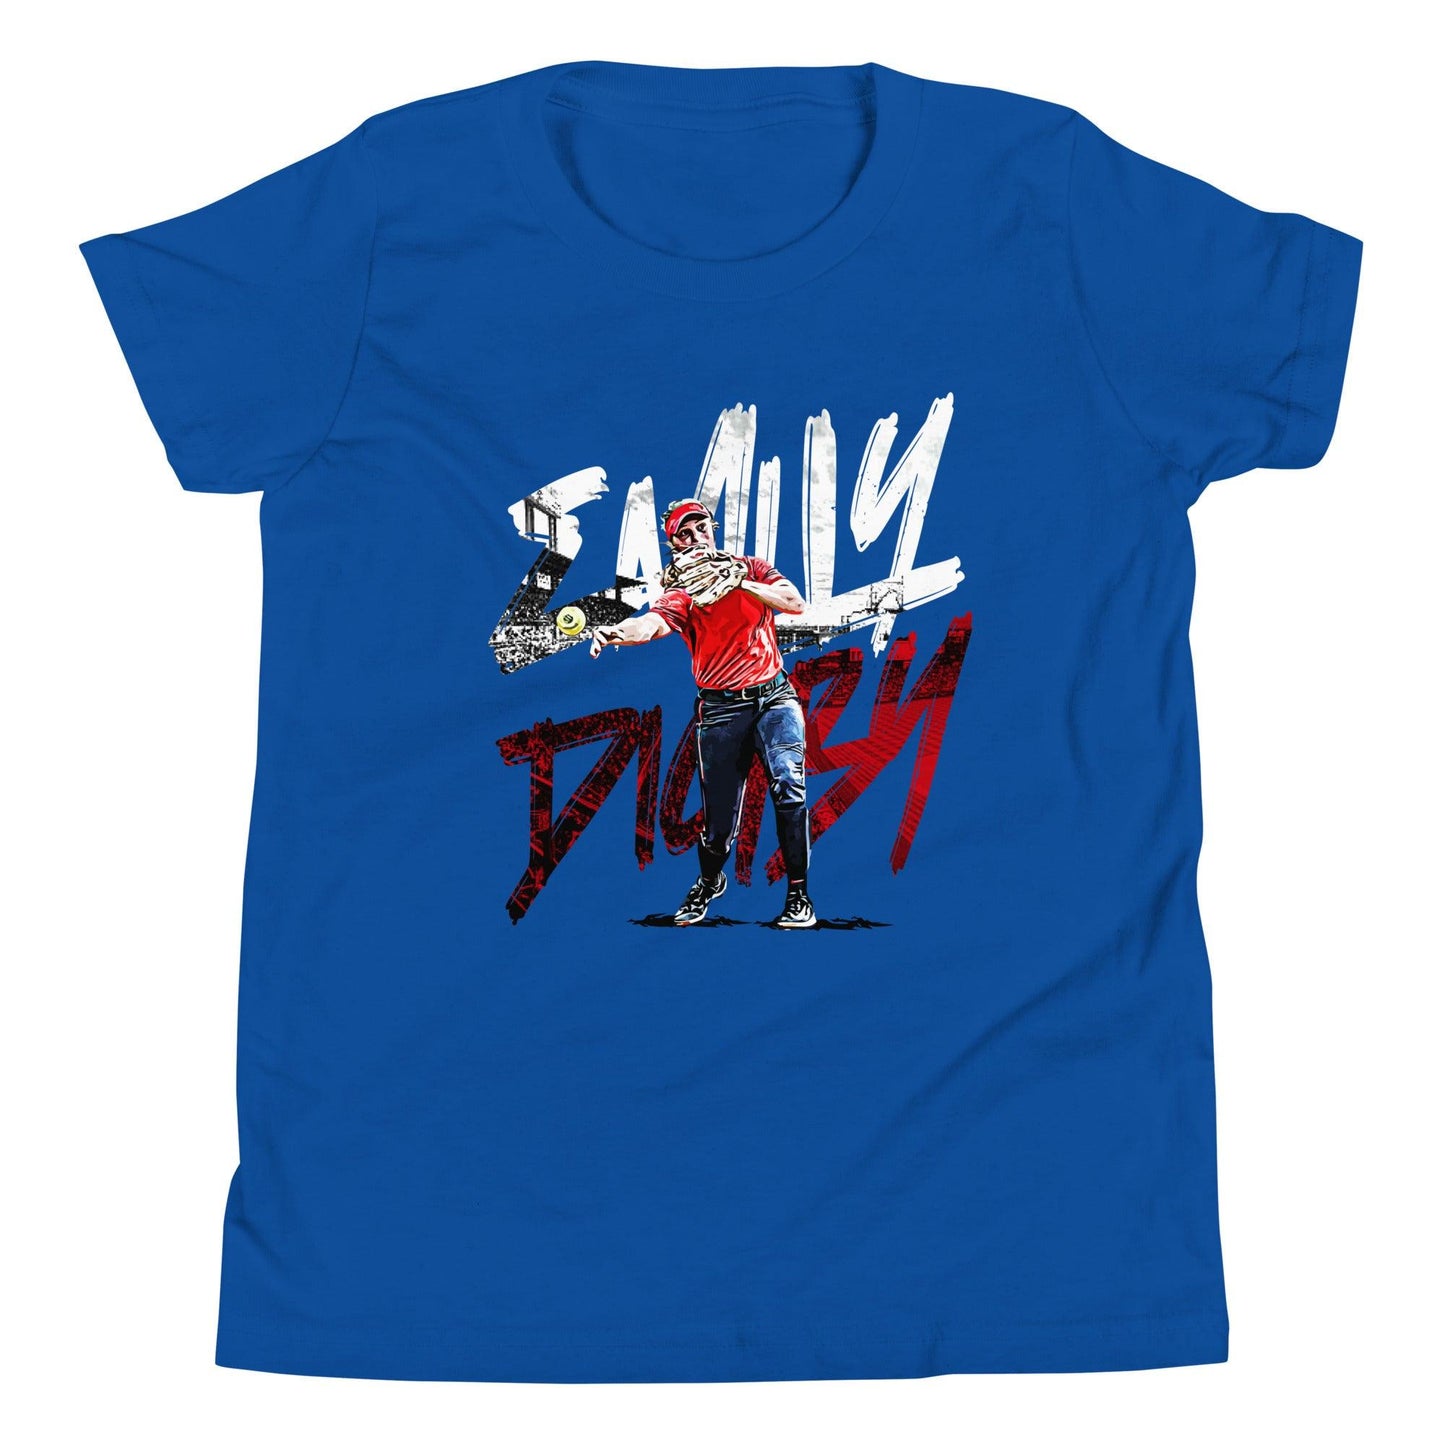 Emily Digby "Gameday" Youth T-Shirt - Fan Arch